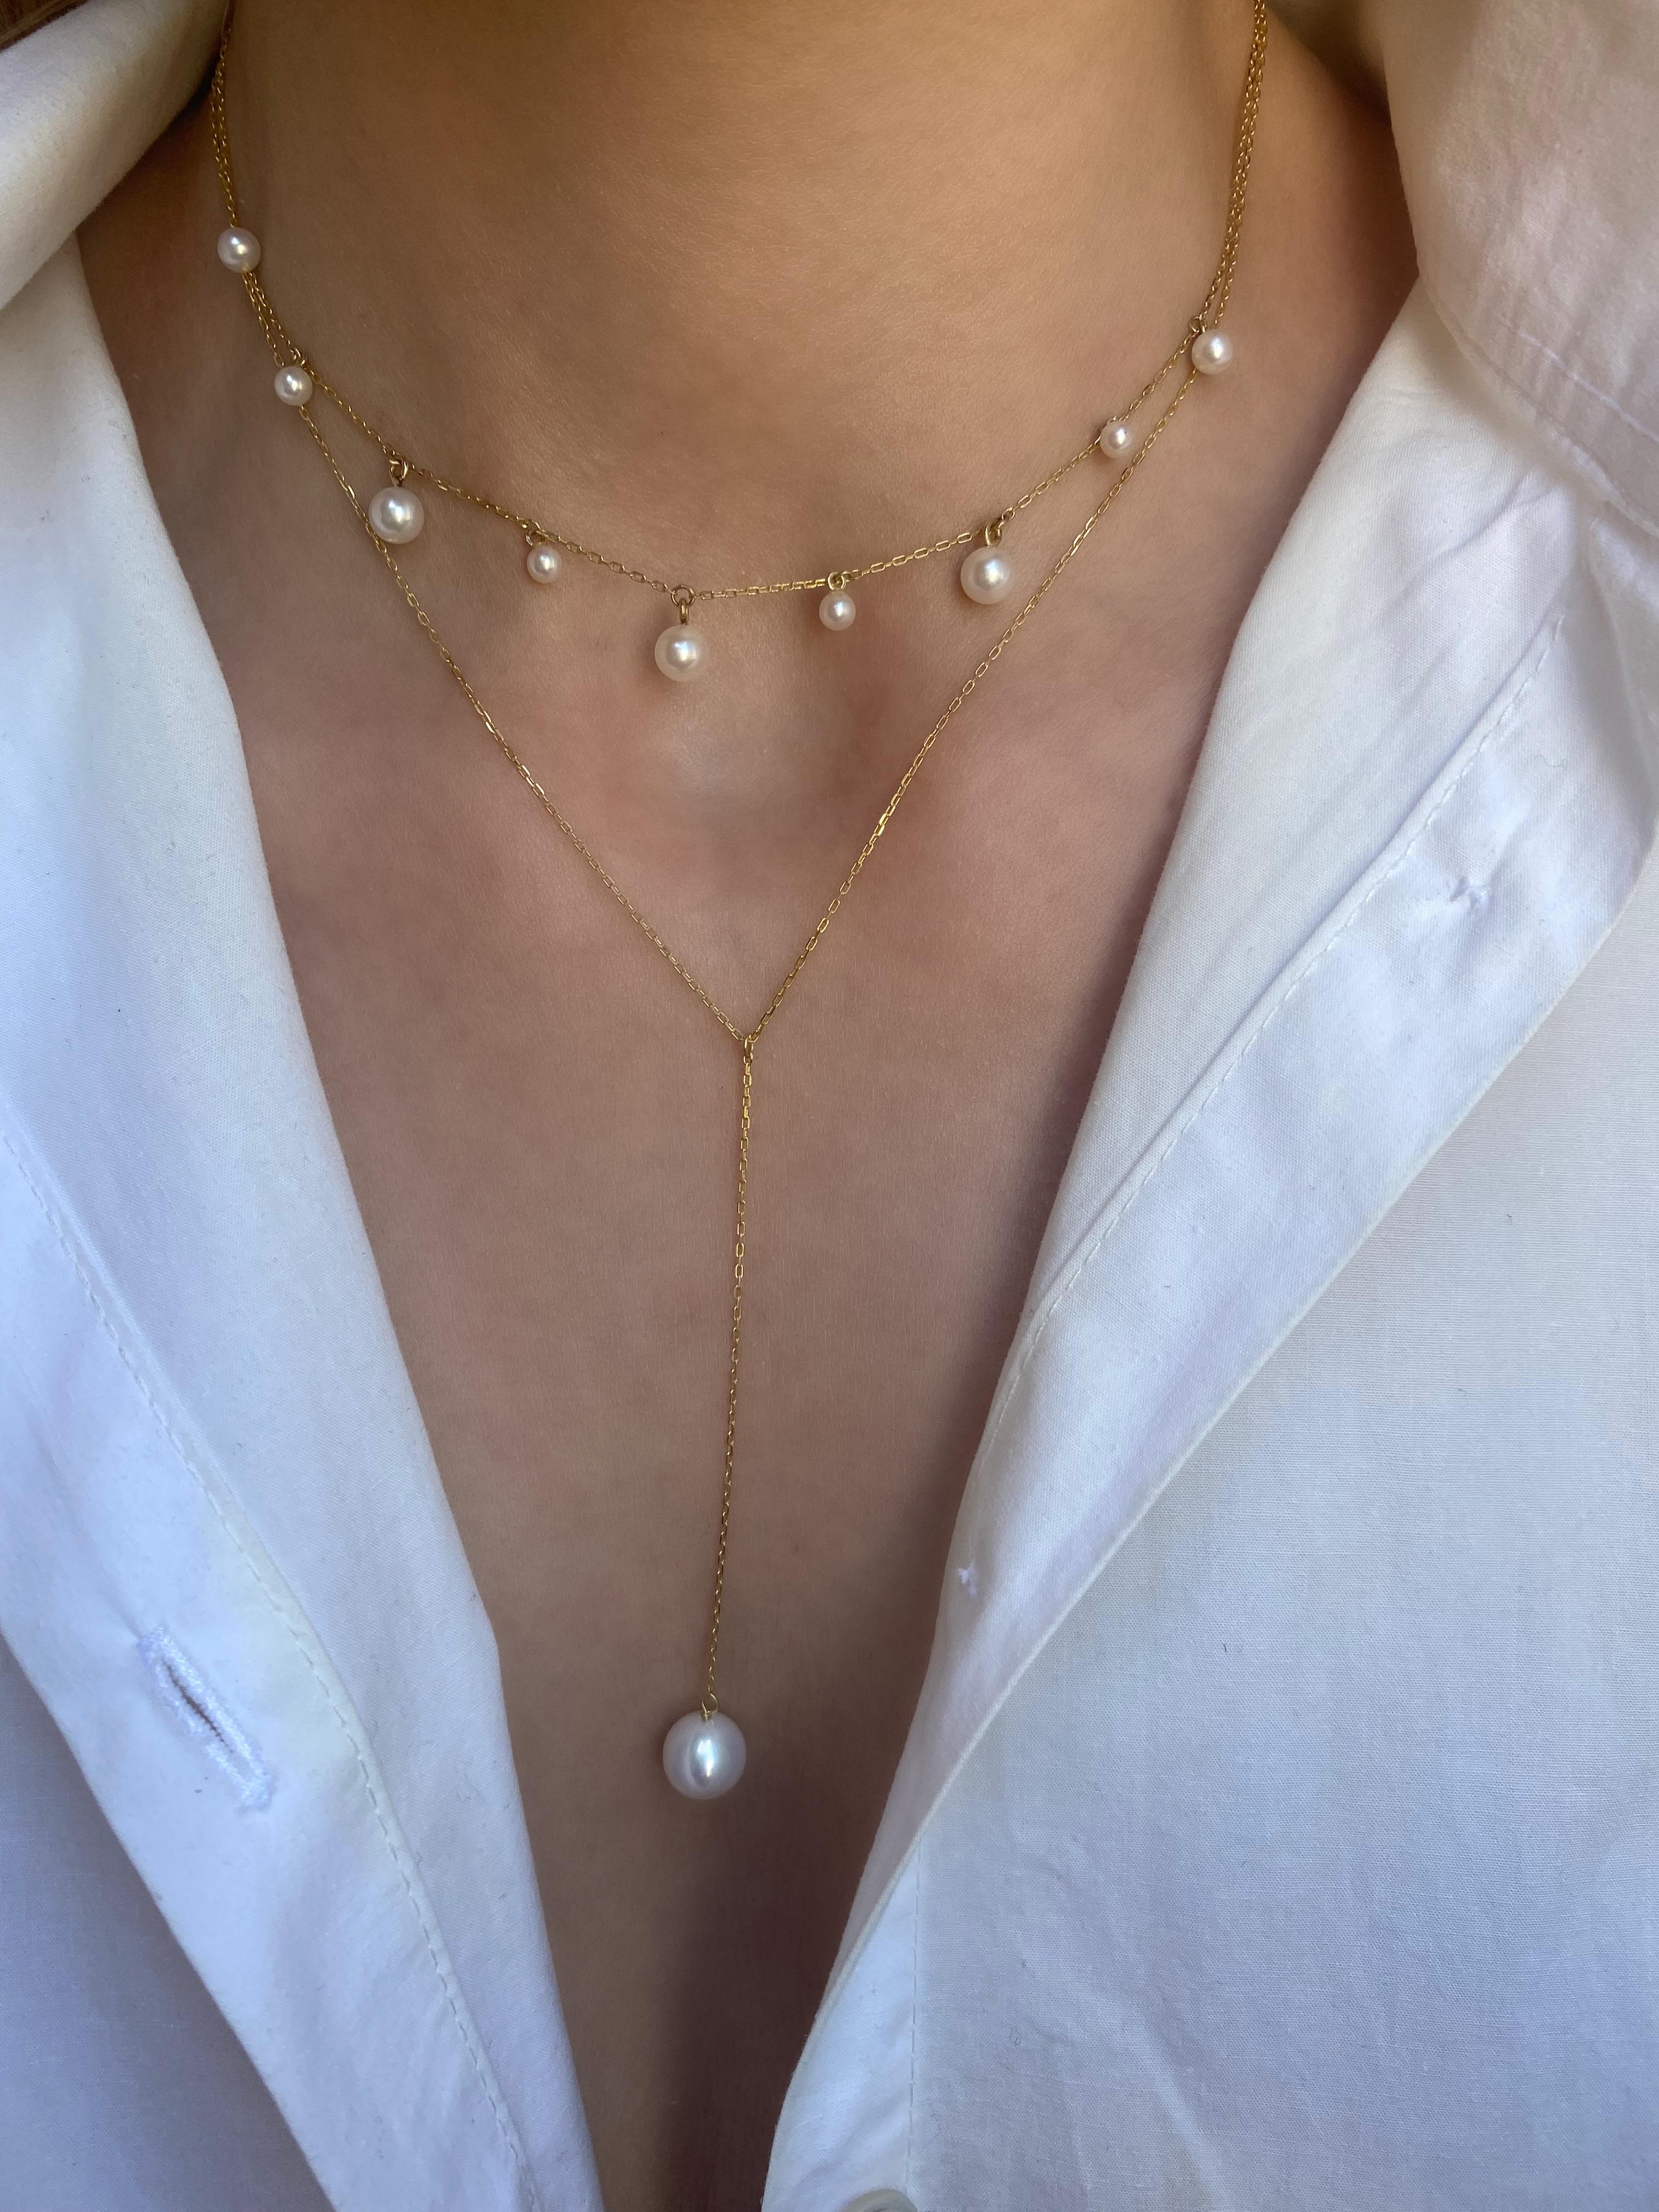 An array of dangling mini pearls hanging from a delicate chain fitted closely around the neck. A modern choker necklace that adds a touch of playfulness to any look.
18 Karat Yellow Gold
Freshwater pearls, 3mm – 5mm
Choker length is 32cm/12.59in